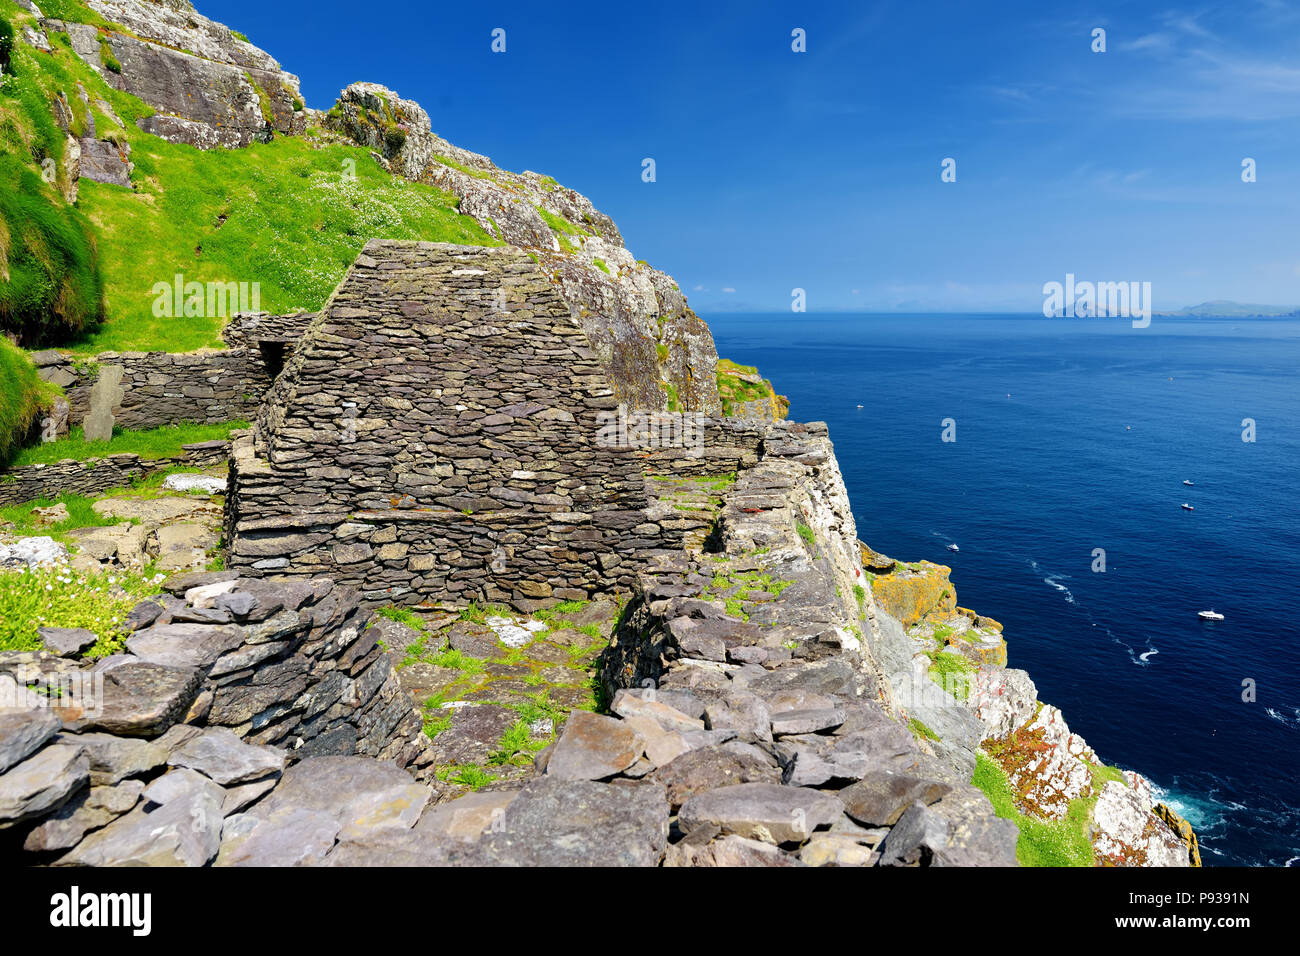 Skellig Michael or Great Skellig, home to the ruined remains of a Christian monastery. Inhabited by variety of seabirds, including gannets and puffins Stock Photo